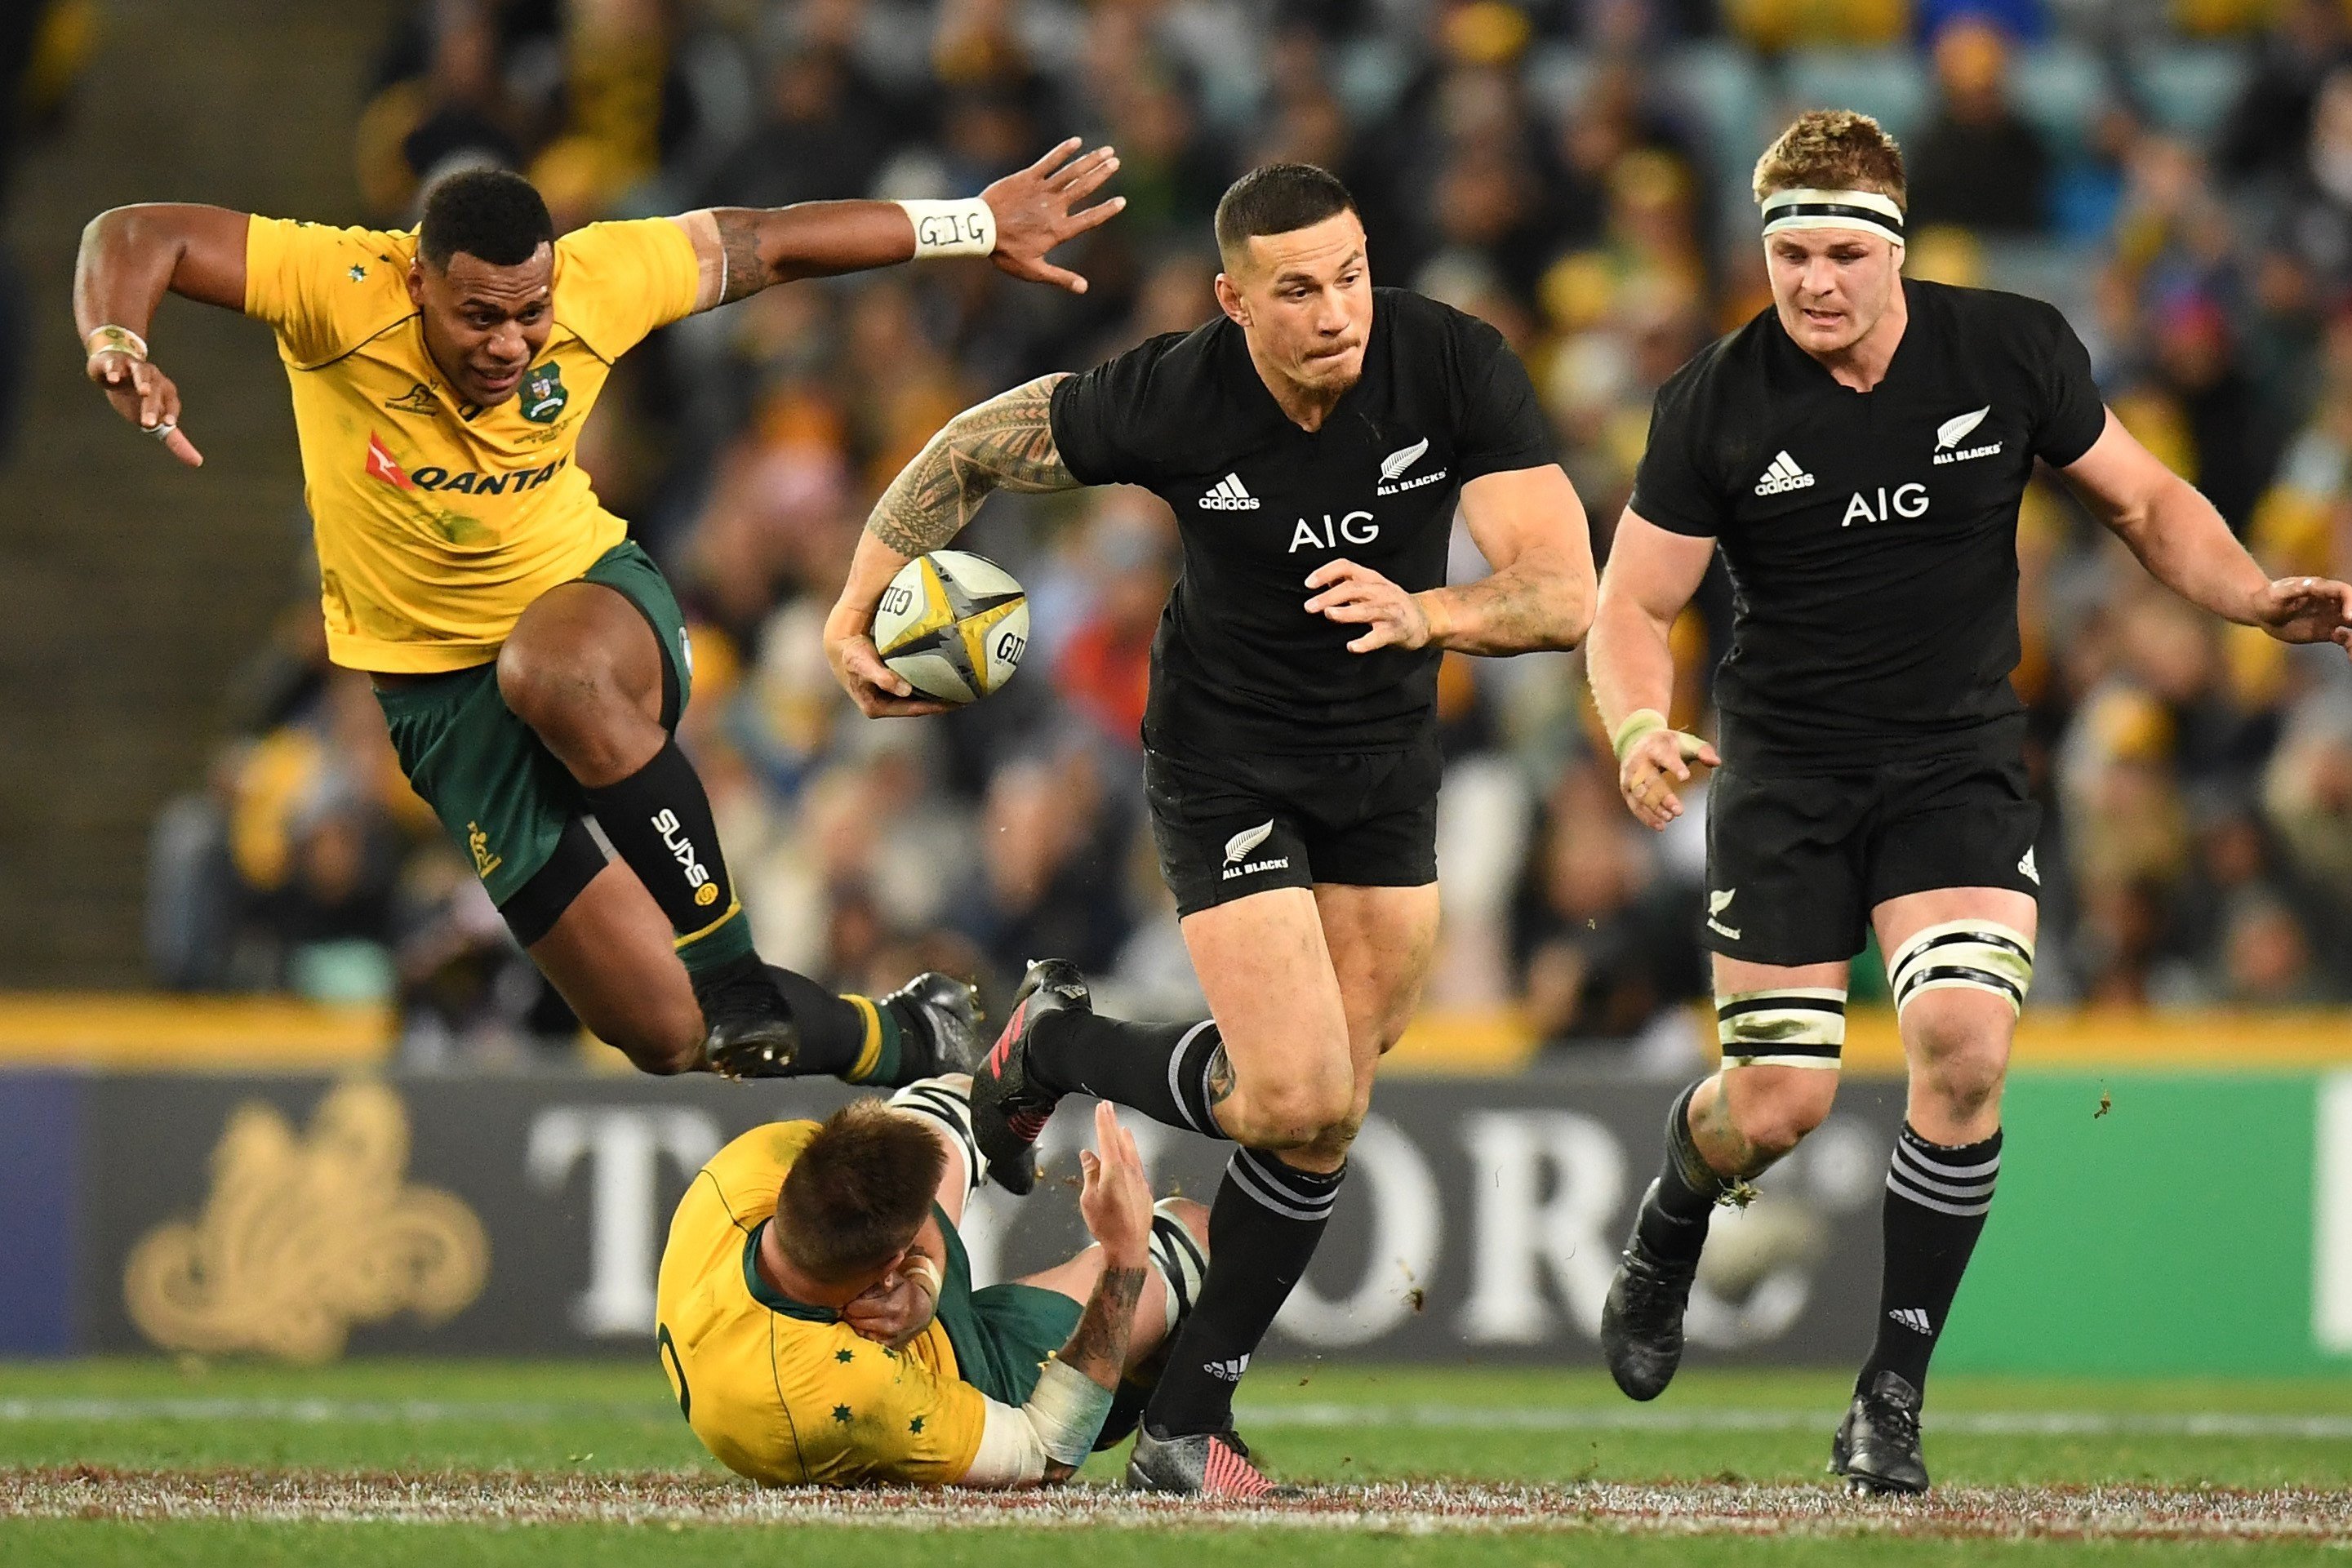 New Zealand’s Sonny Bill Williams steps through a tackle by Sean McMahon of Australia as Samu Kerevi of Australia leaps during game one of the Bledisloe Cup. Photos: EPA